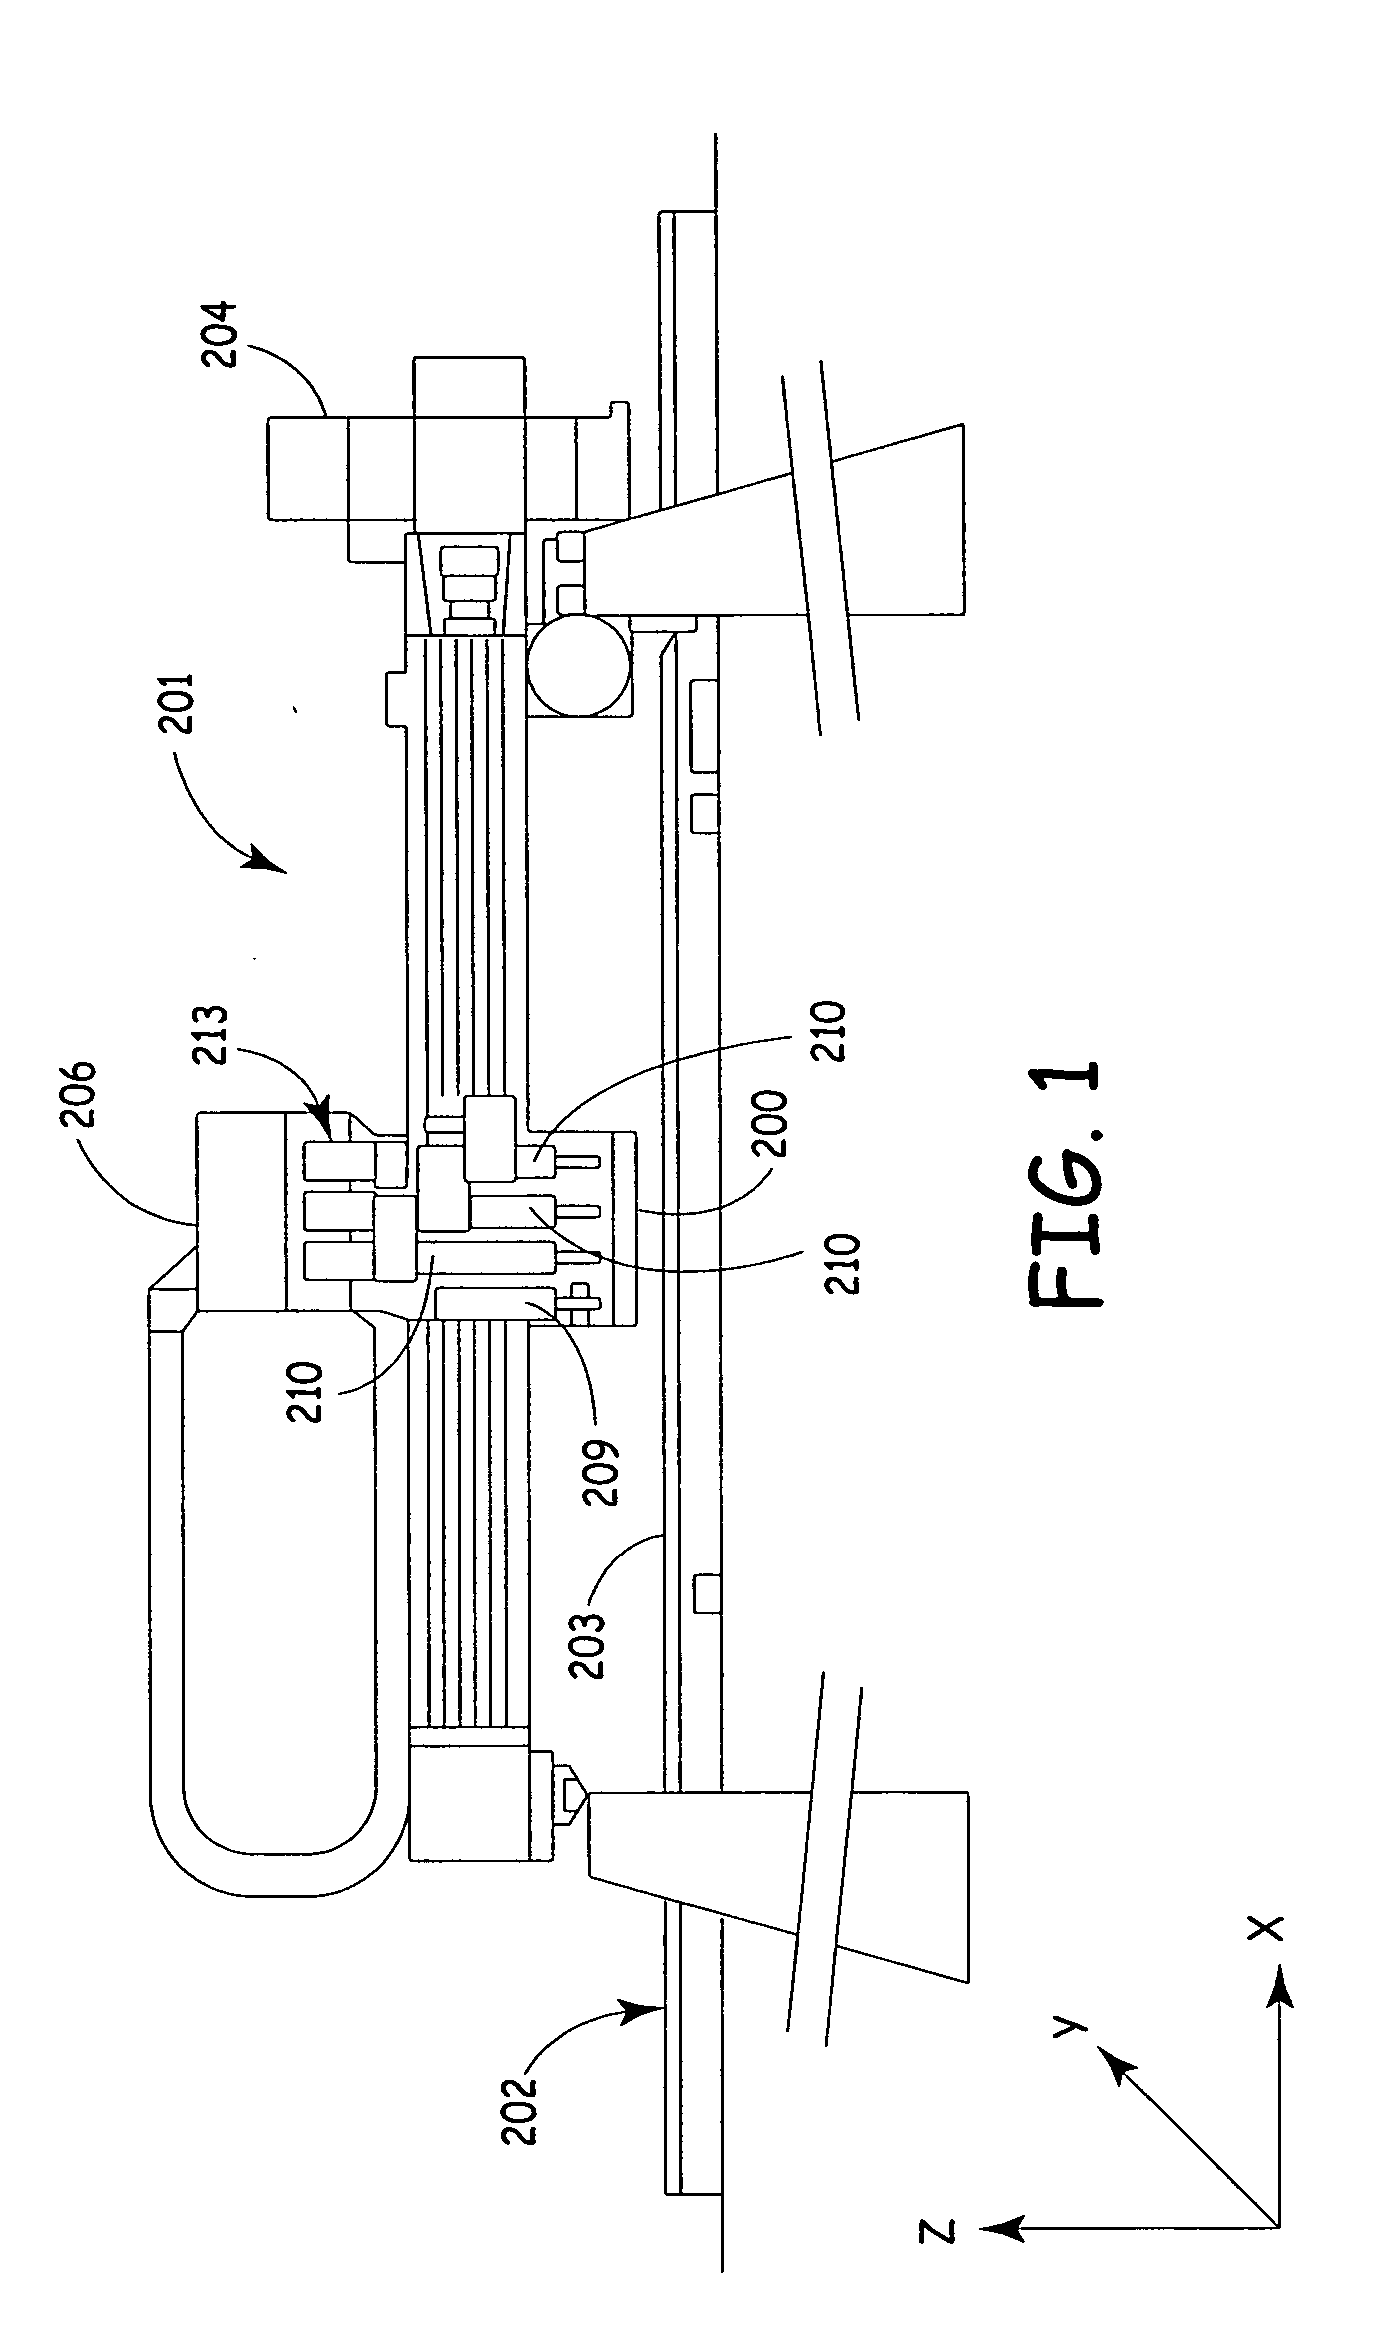 Pick and place machine with improved component placement inspection